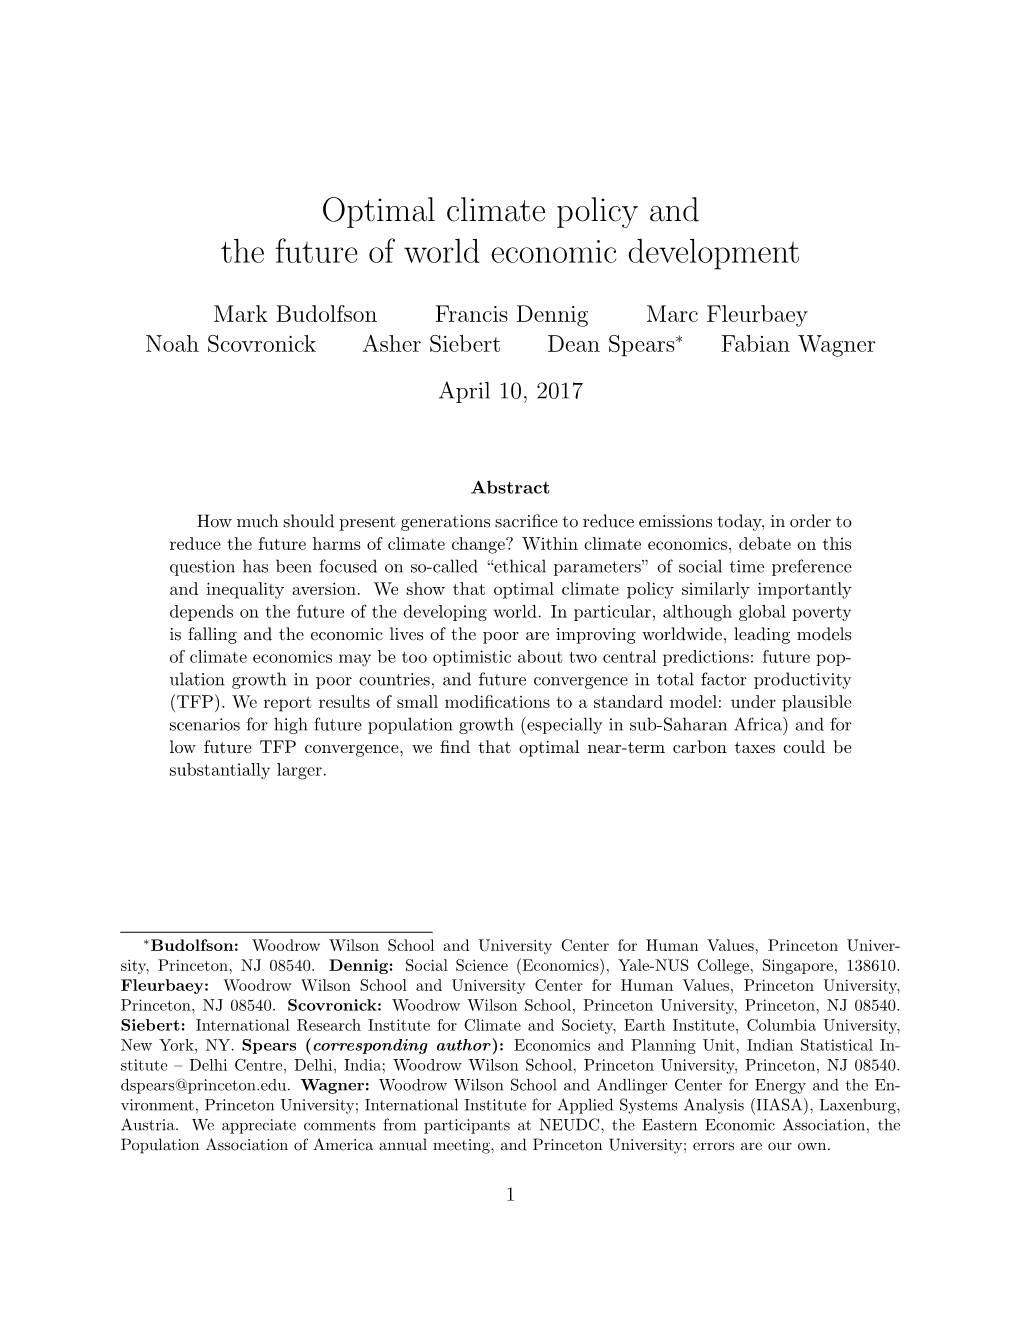 Optimal Climate Policy and the Future of World Economic Development